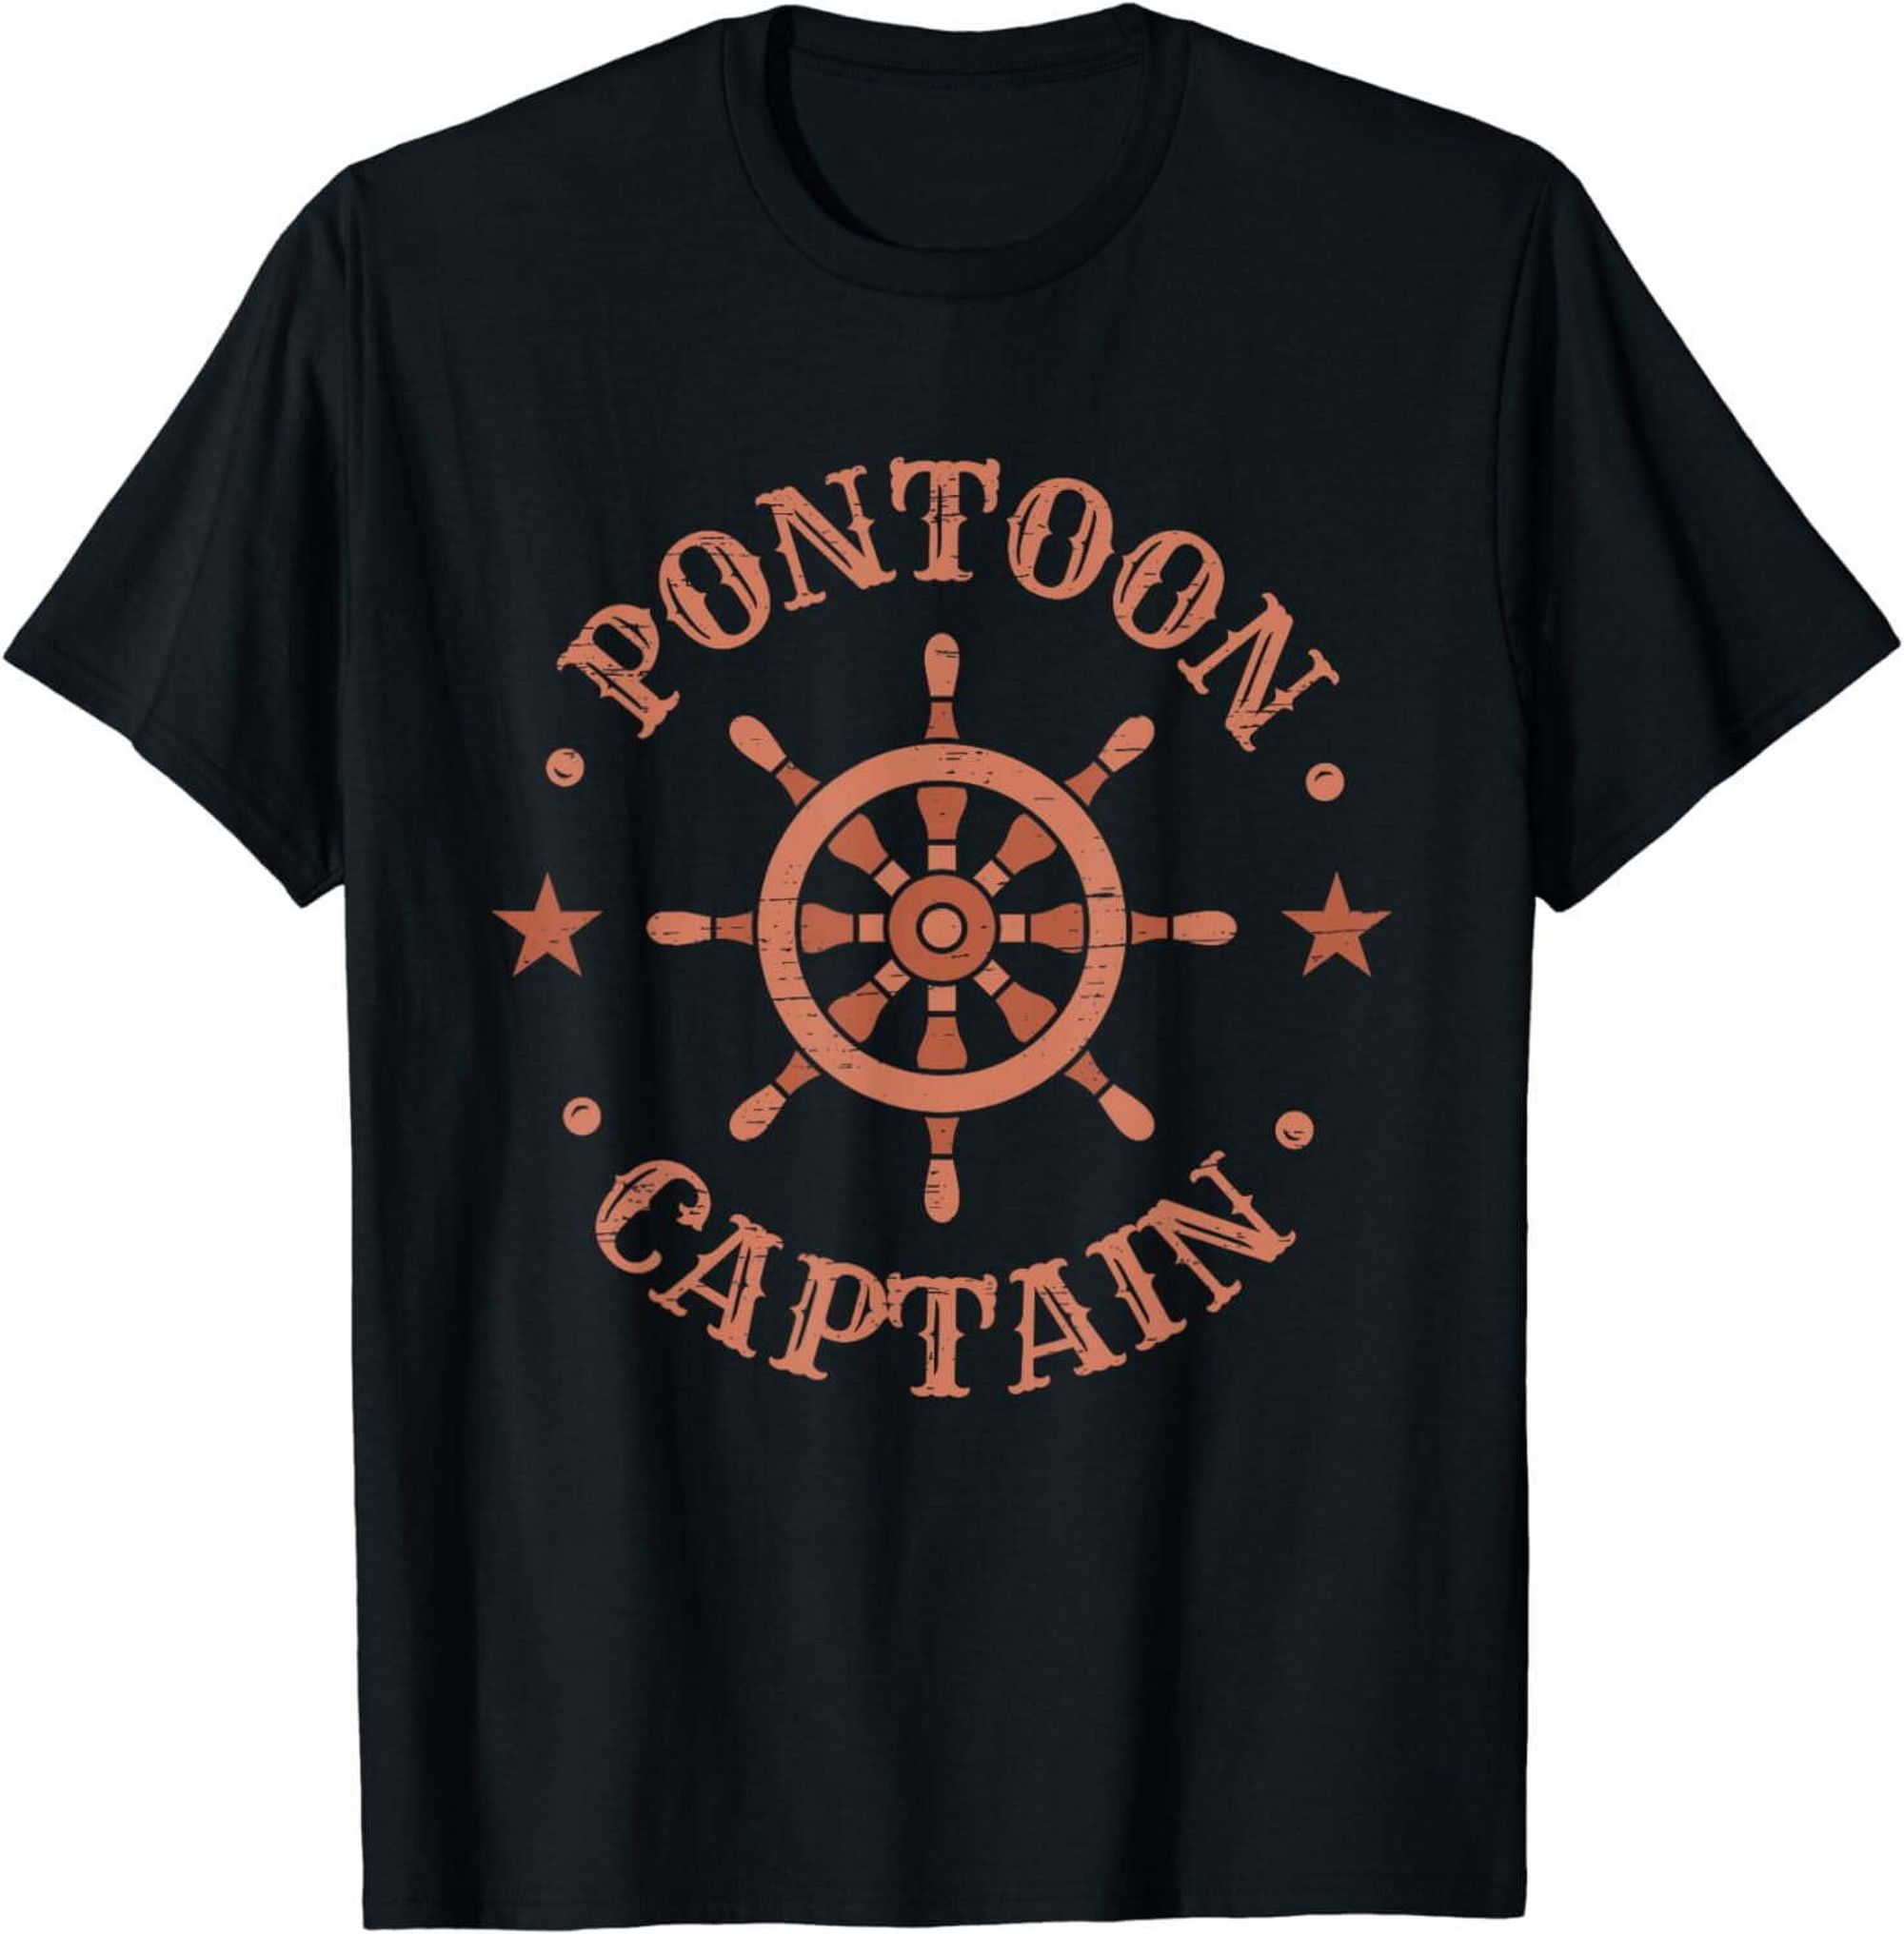 Captain of the Pontoon: Navigating the Waters with Humor and Style ...